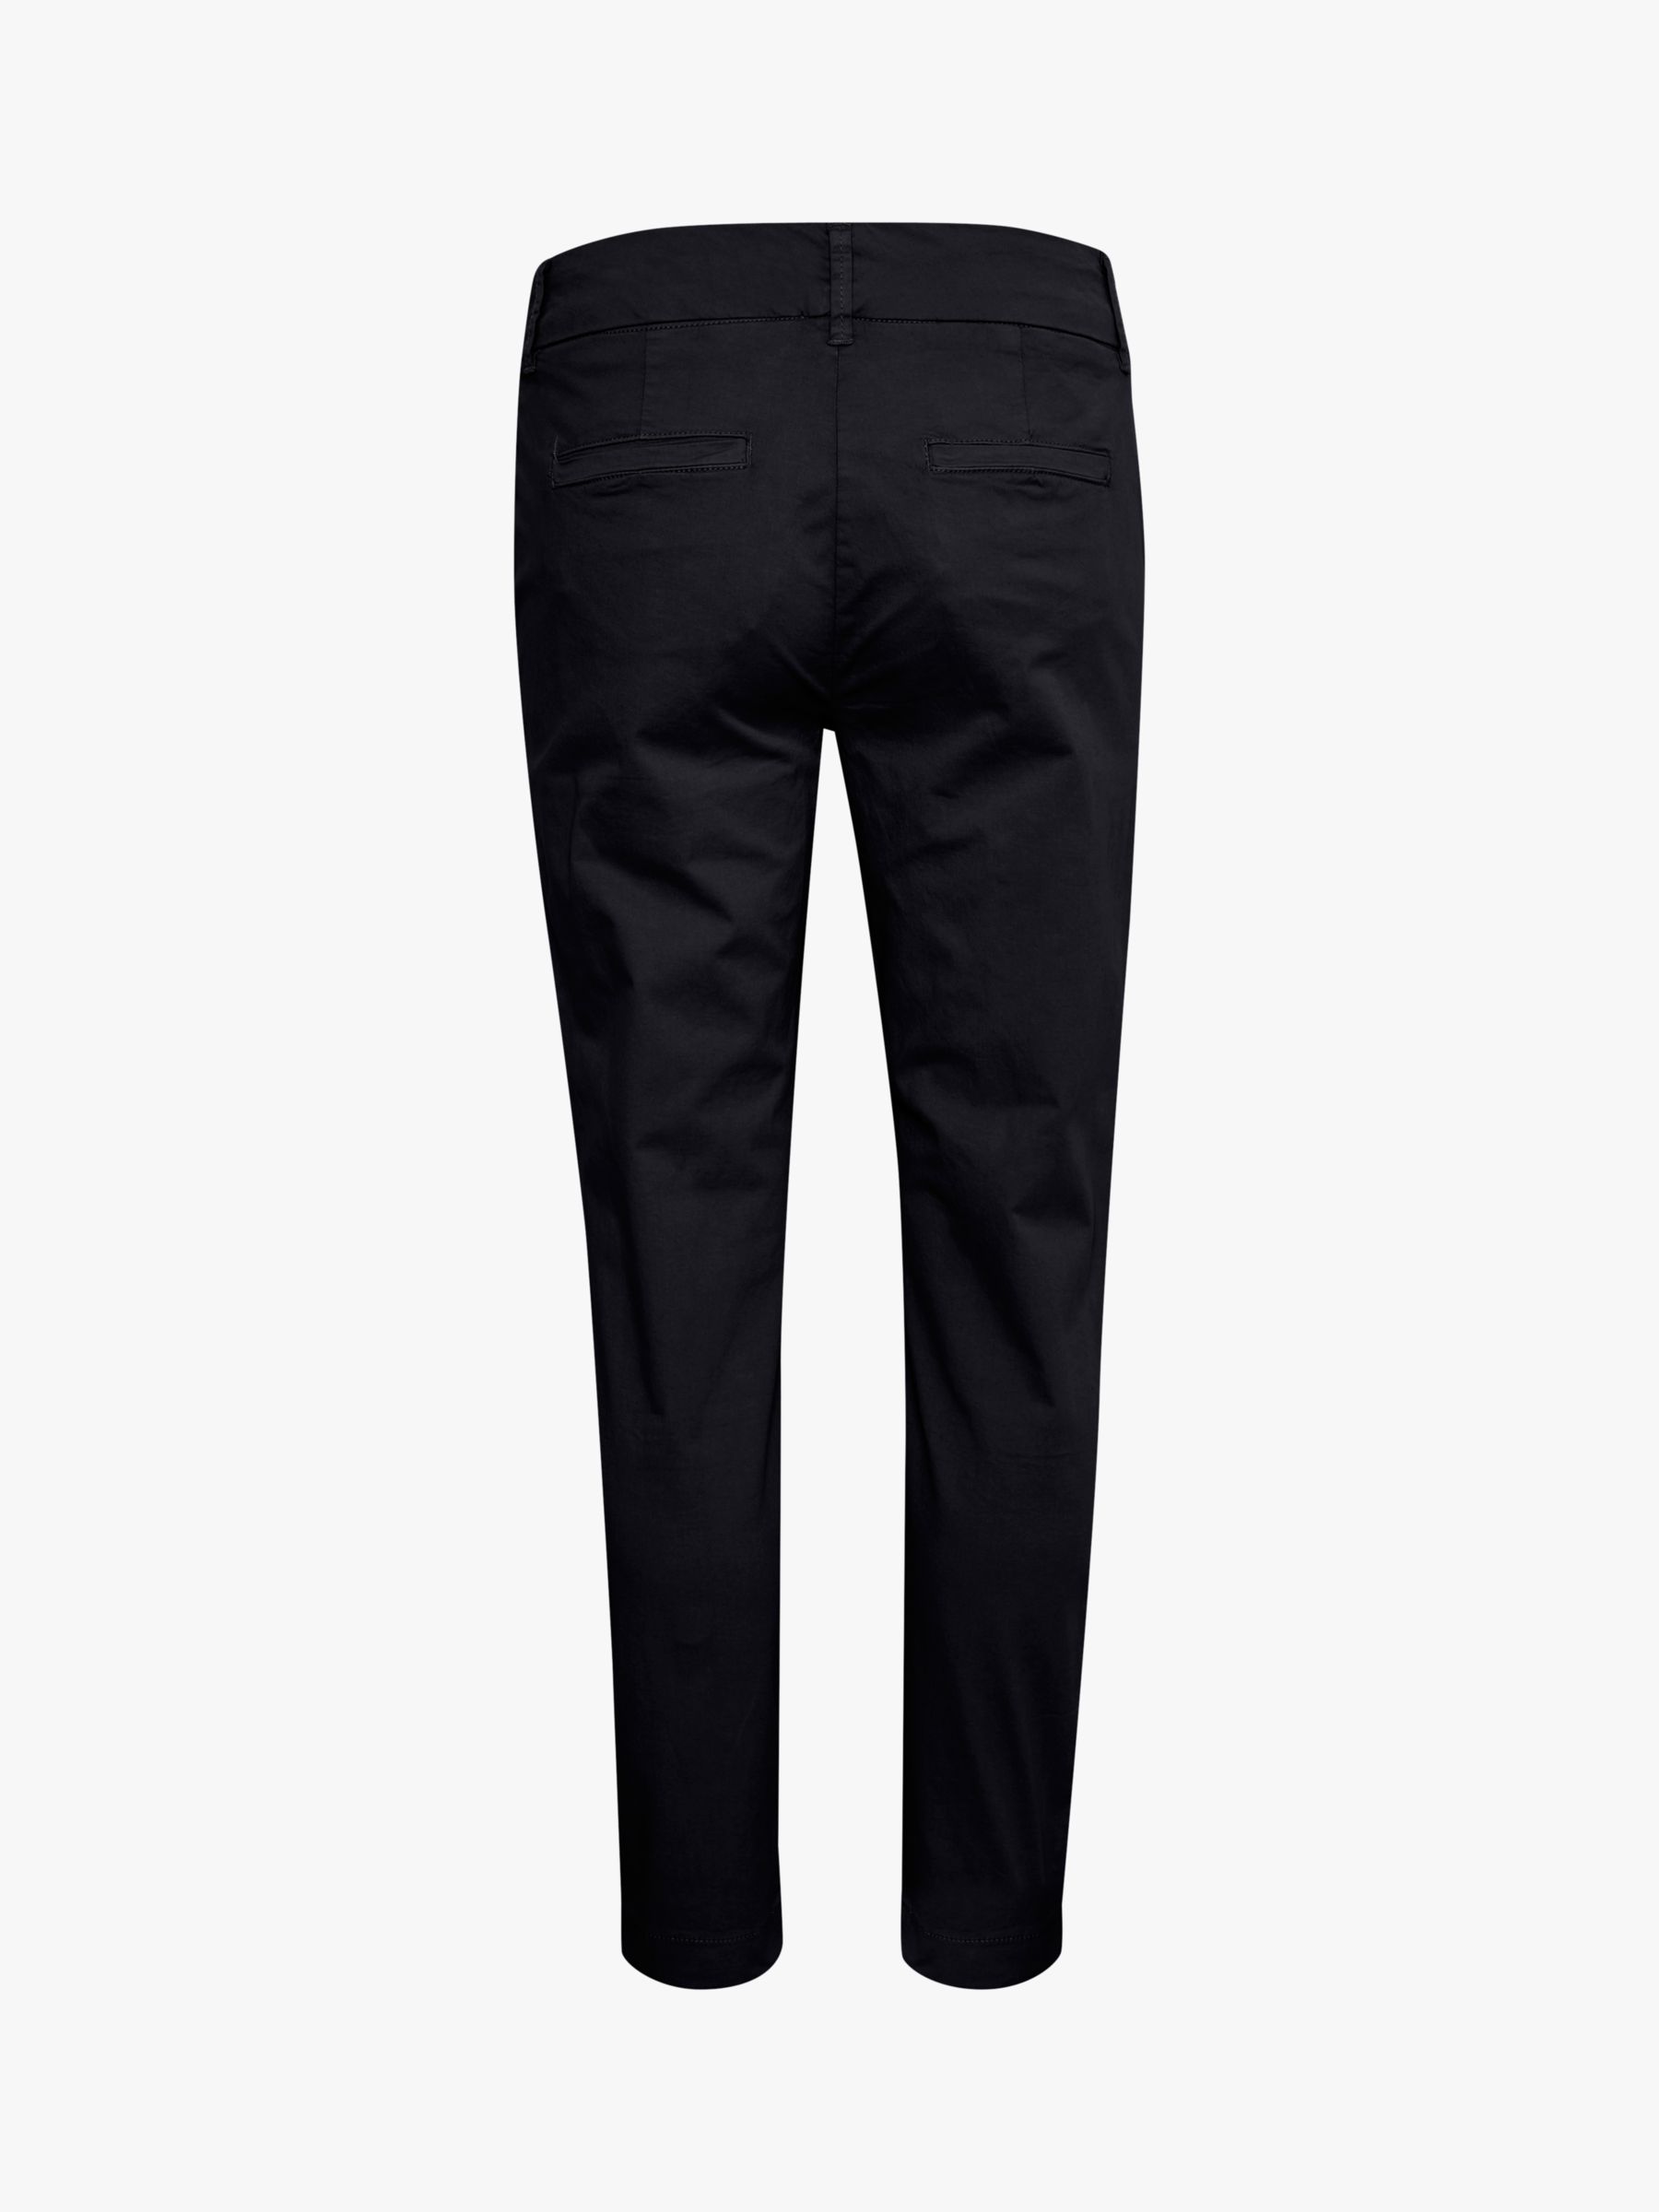 Buy Part Two Soffys Skinny Cropped Trousers Online at johnlewis.com